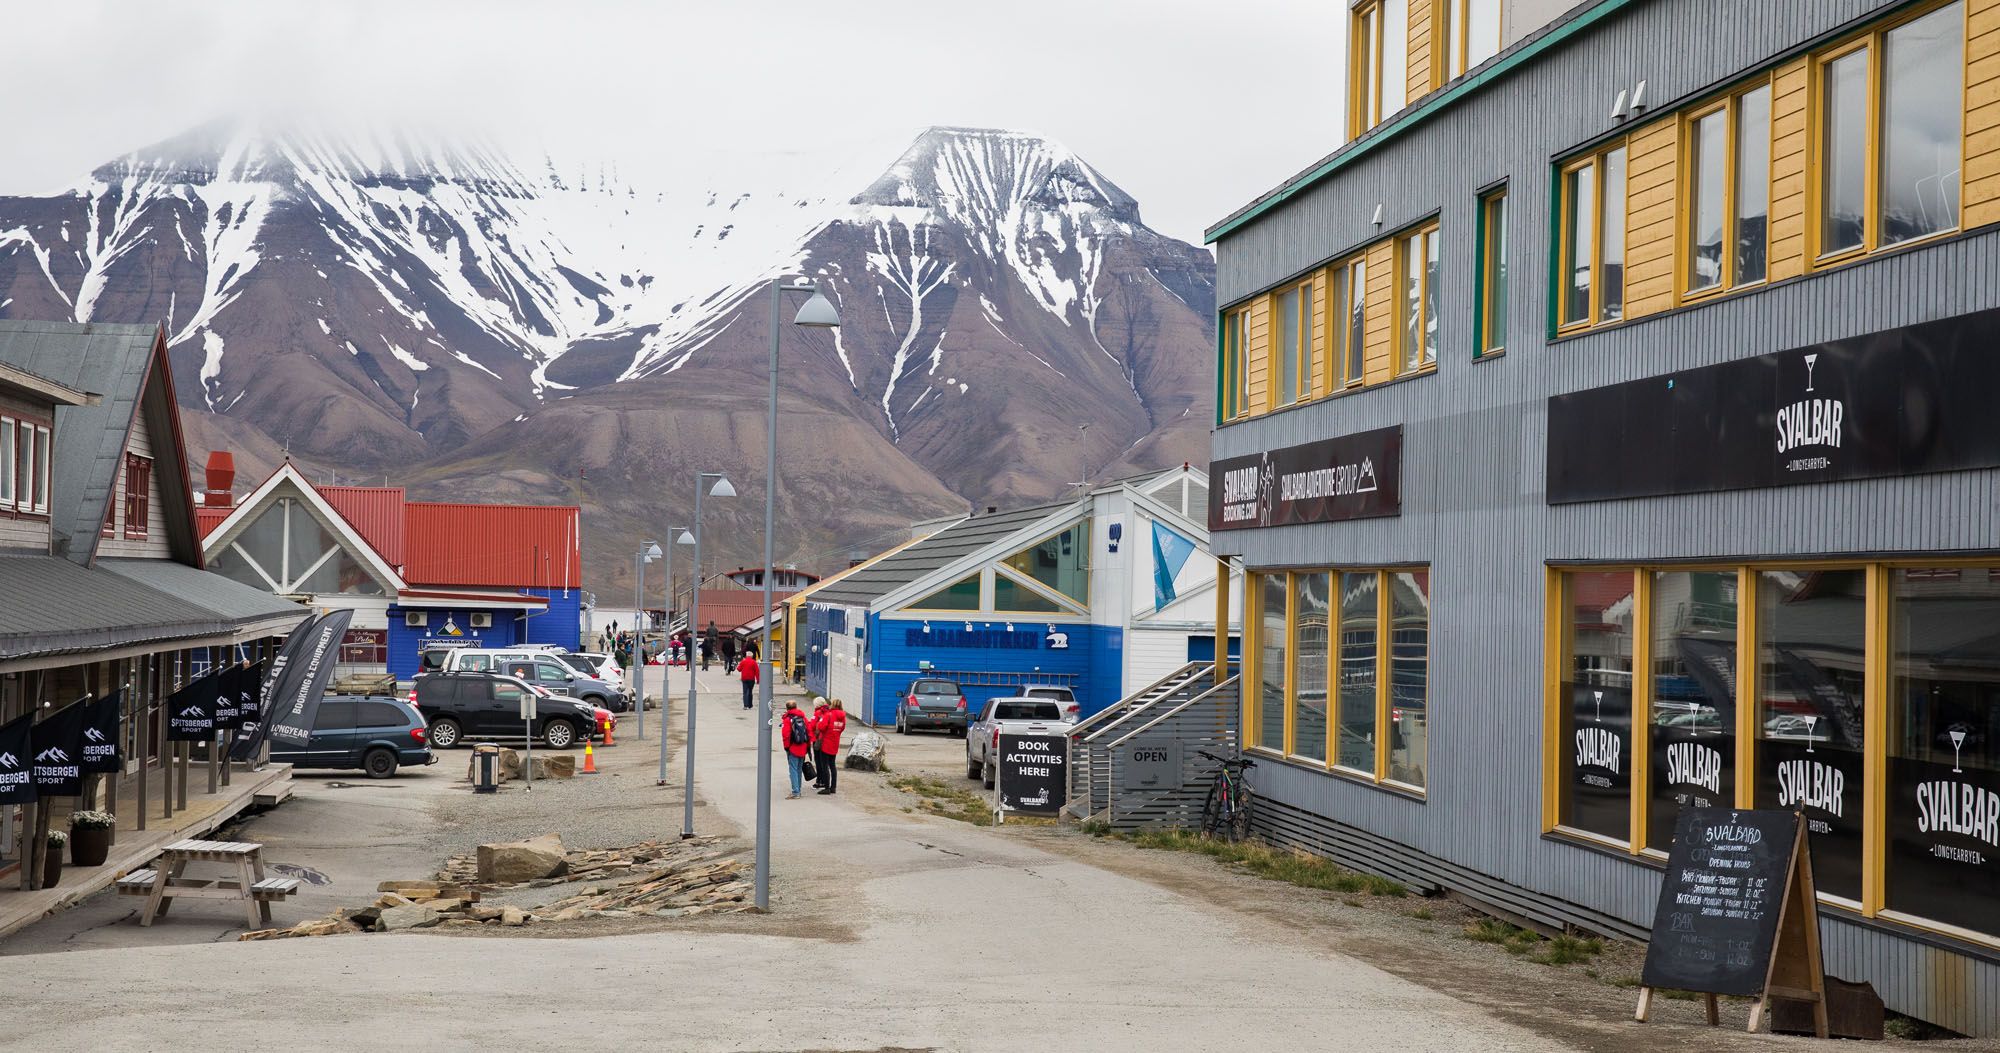 Featured image for “Top Ten Things to Do in Longyearbyen, Svalbard”